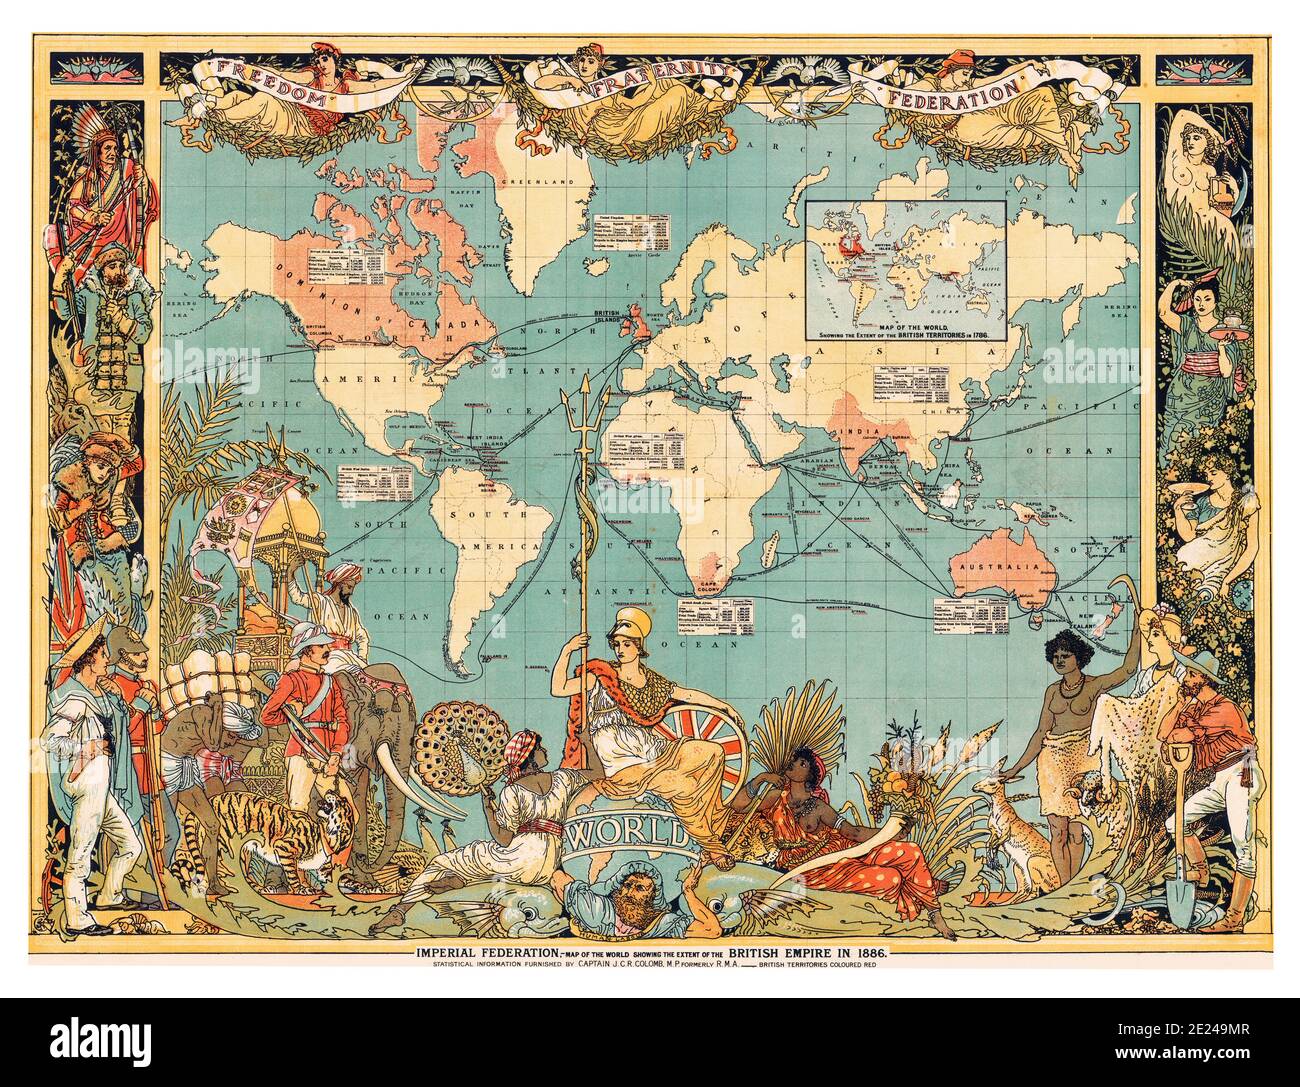 File:A map of the king of Great Britain's dominions in Europe, Africa and  America.jpg - Wikimedia Commons